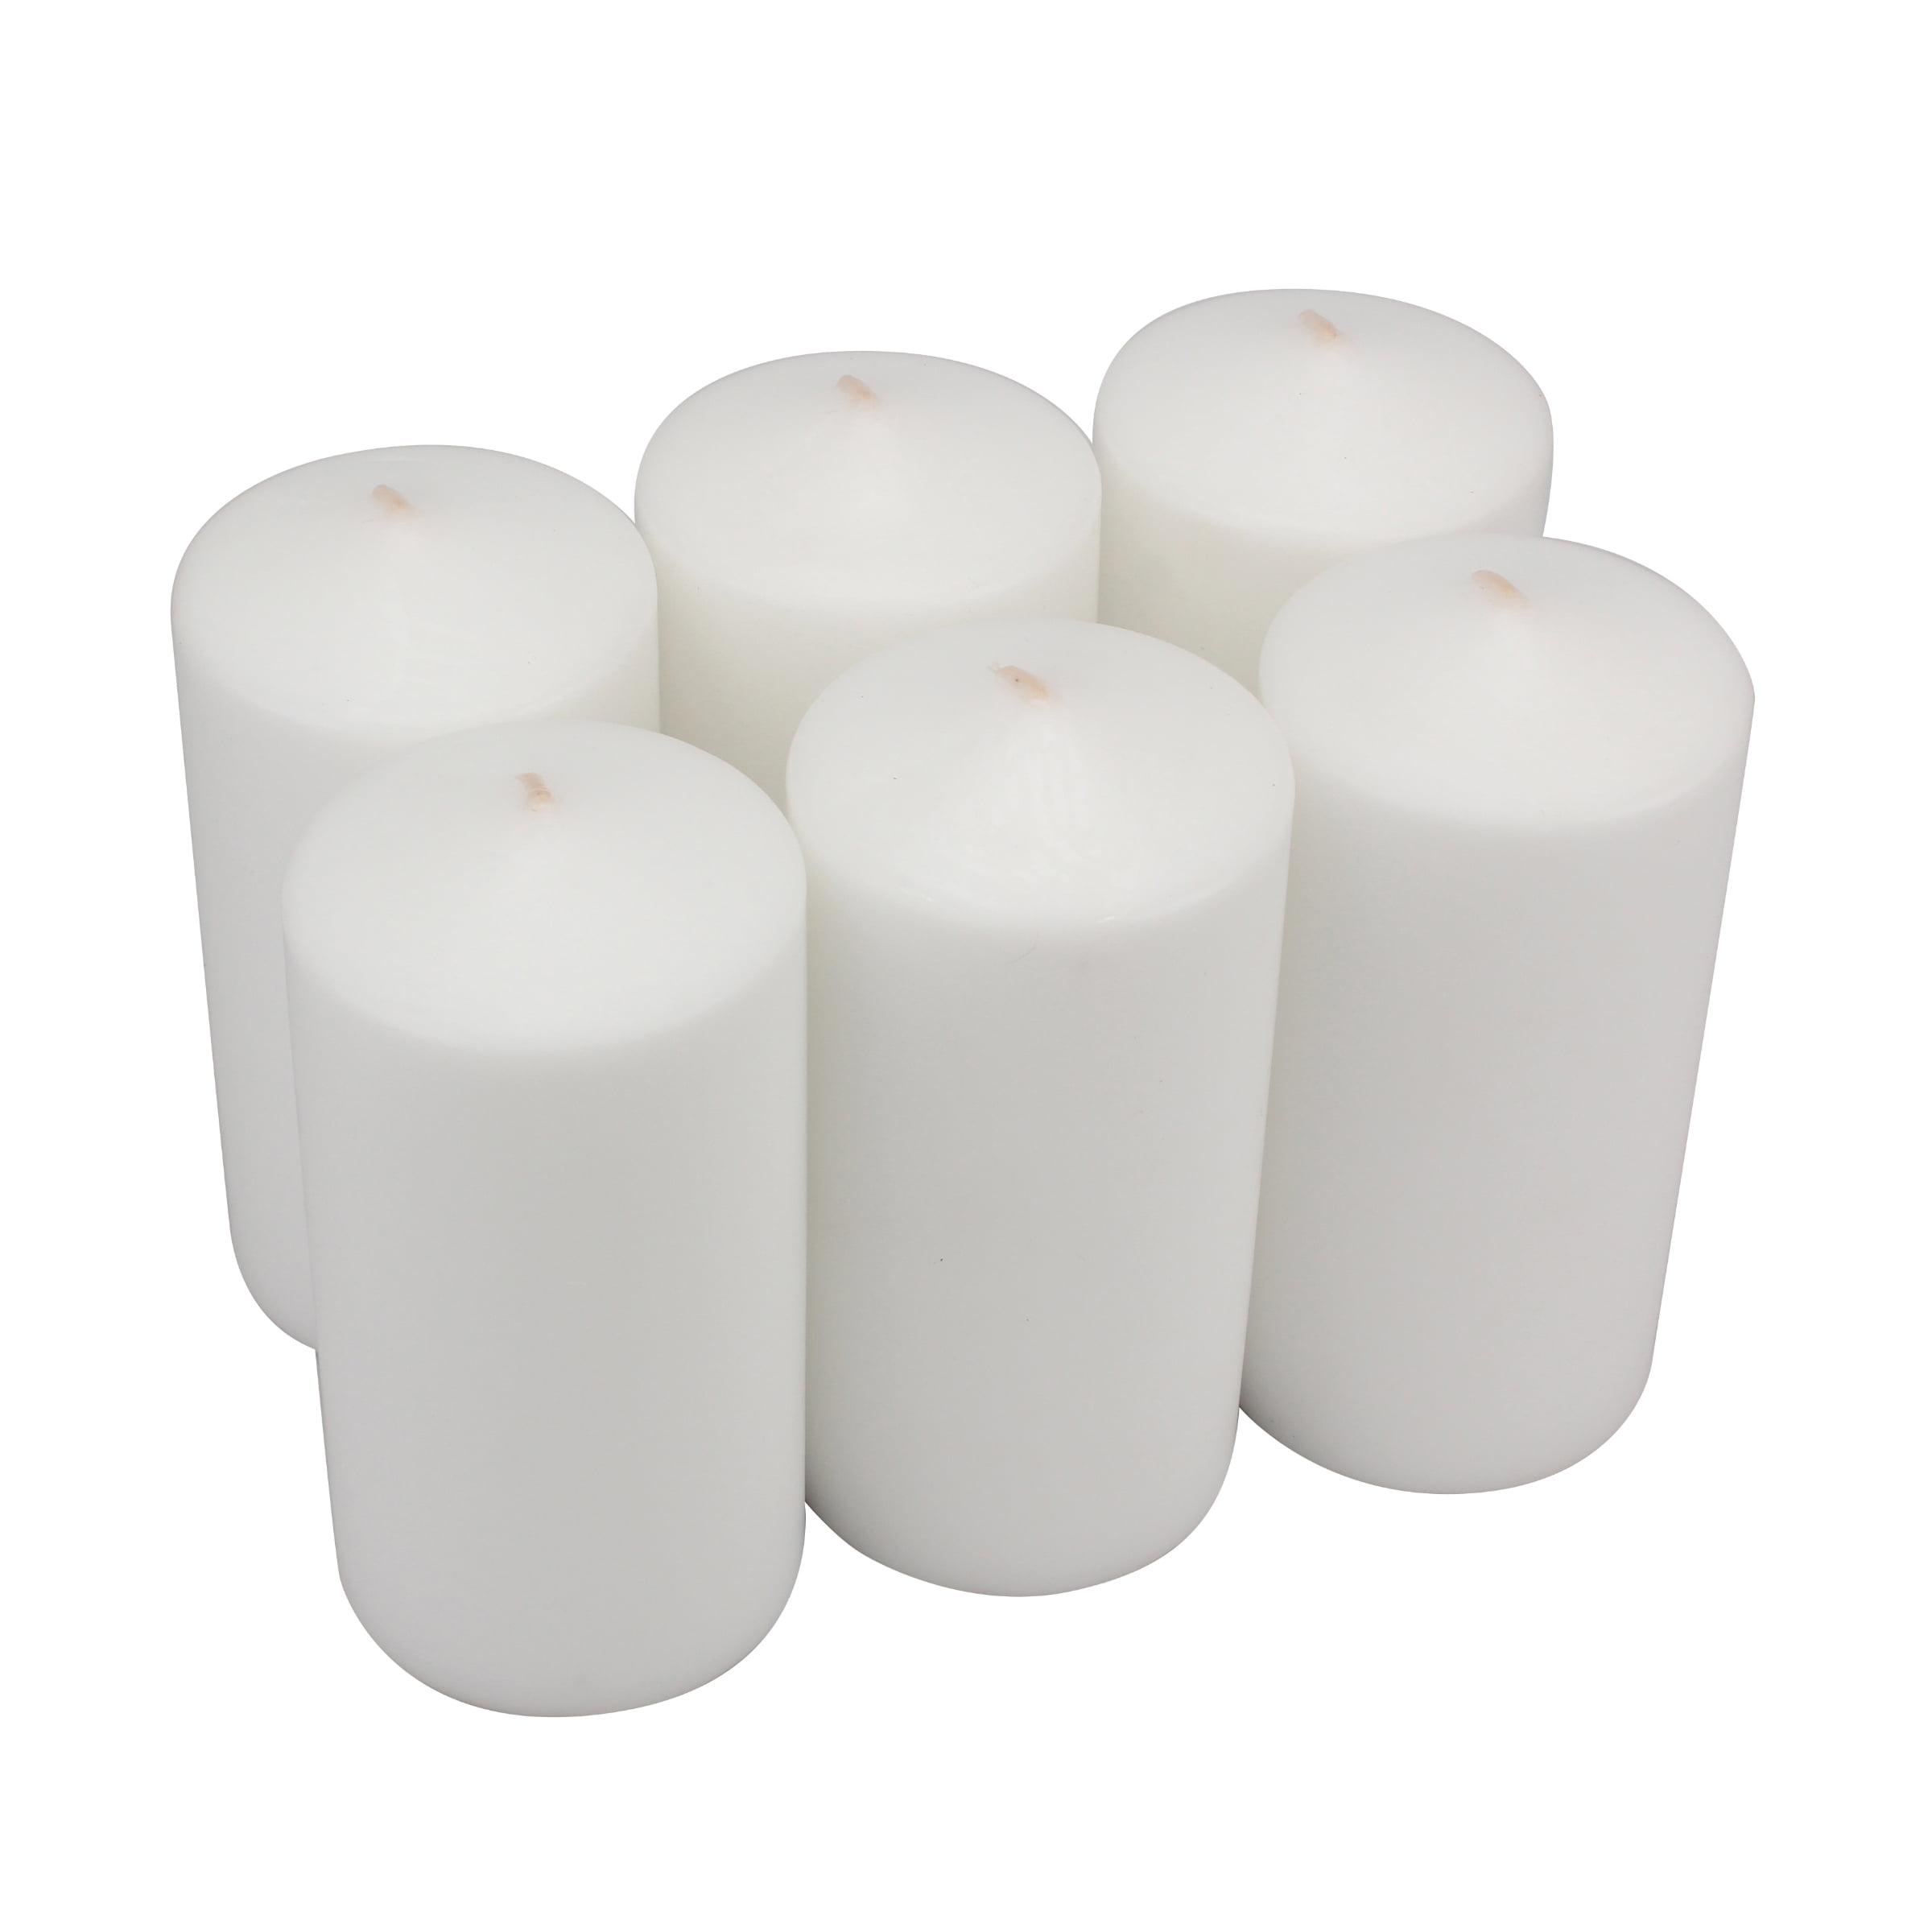 Serenity Palm 10" Flameless White Scented Pillar Candle